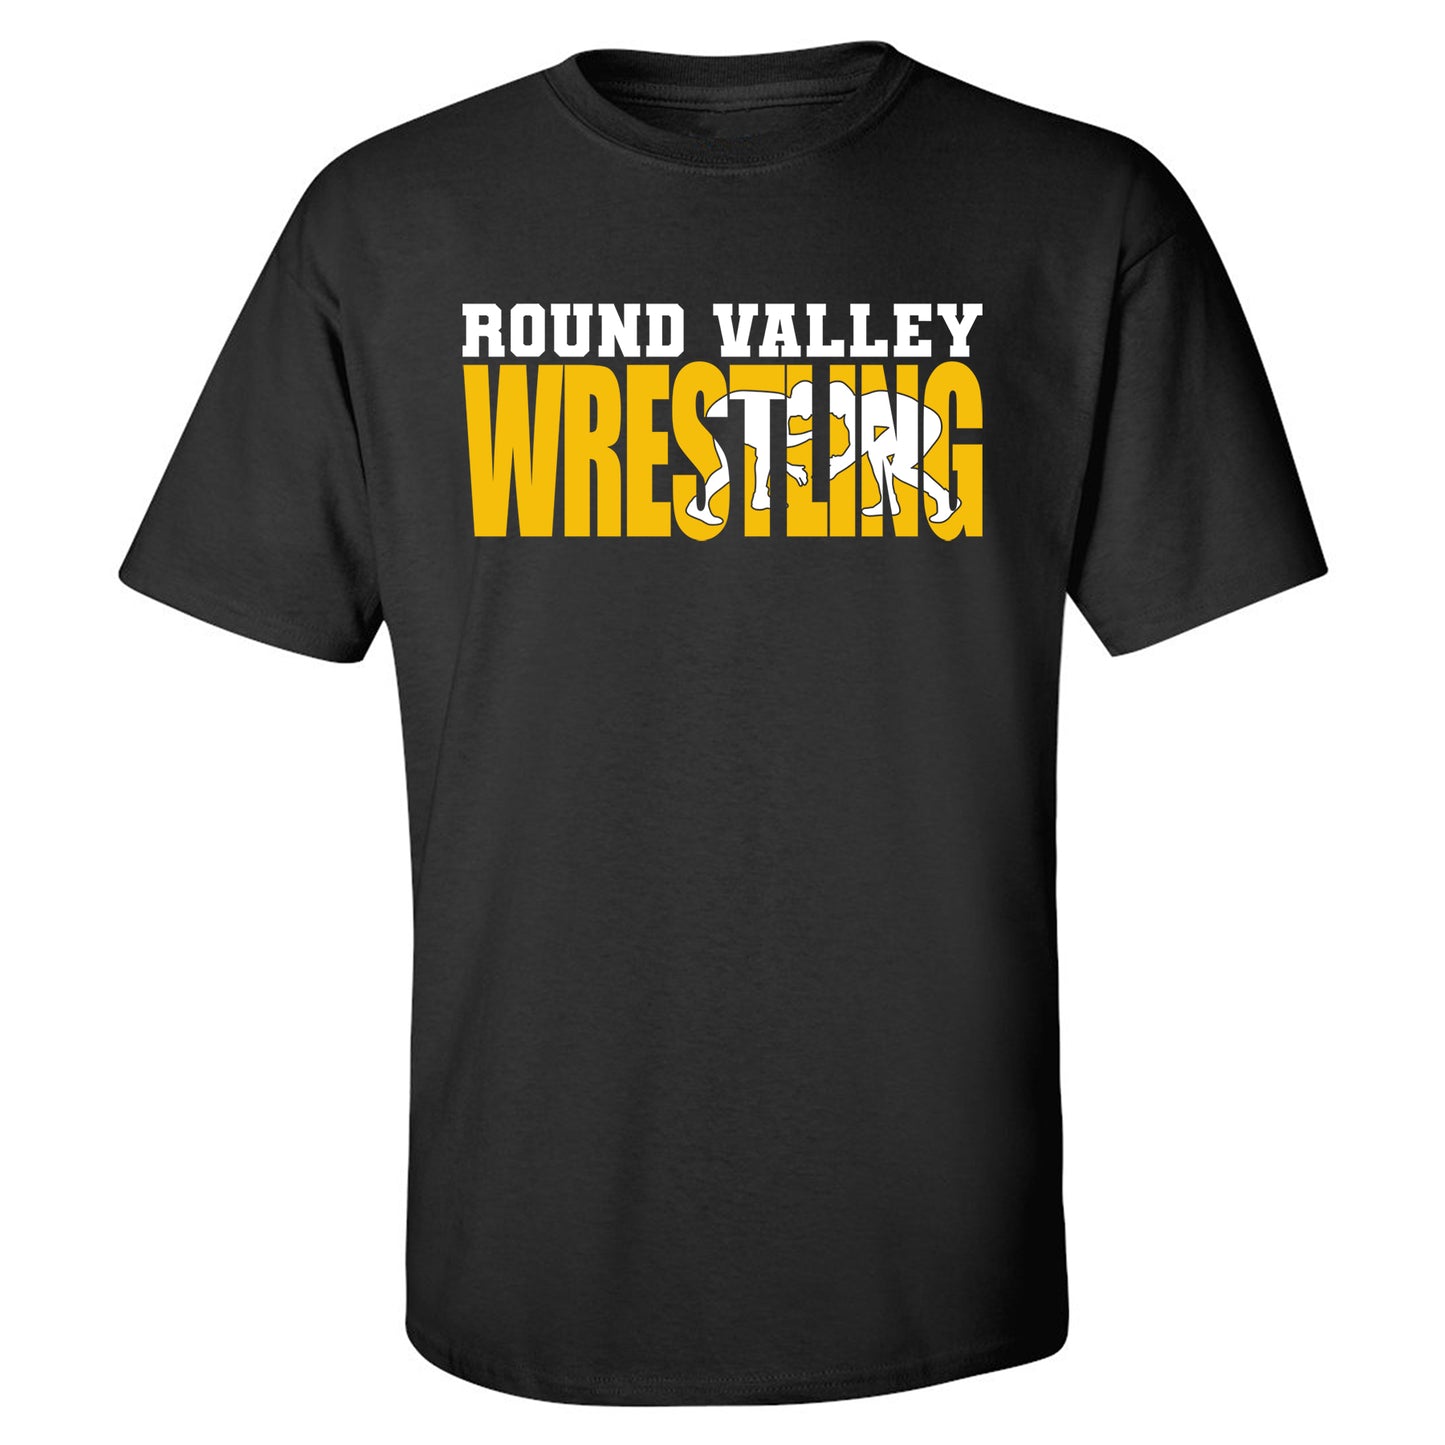 Round Valley Wrestling in Text - ADULT